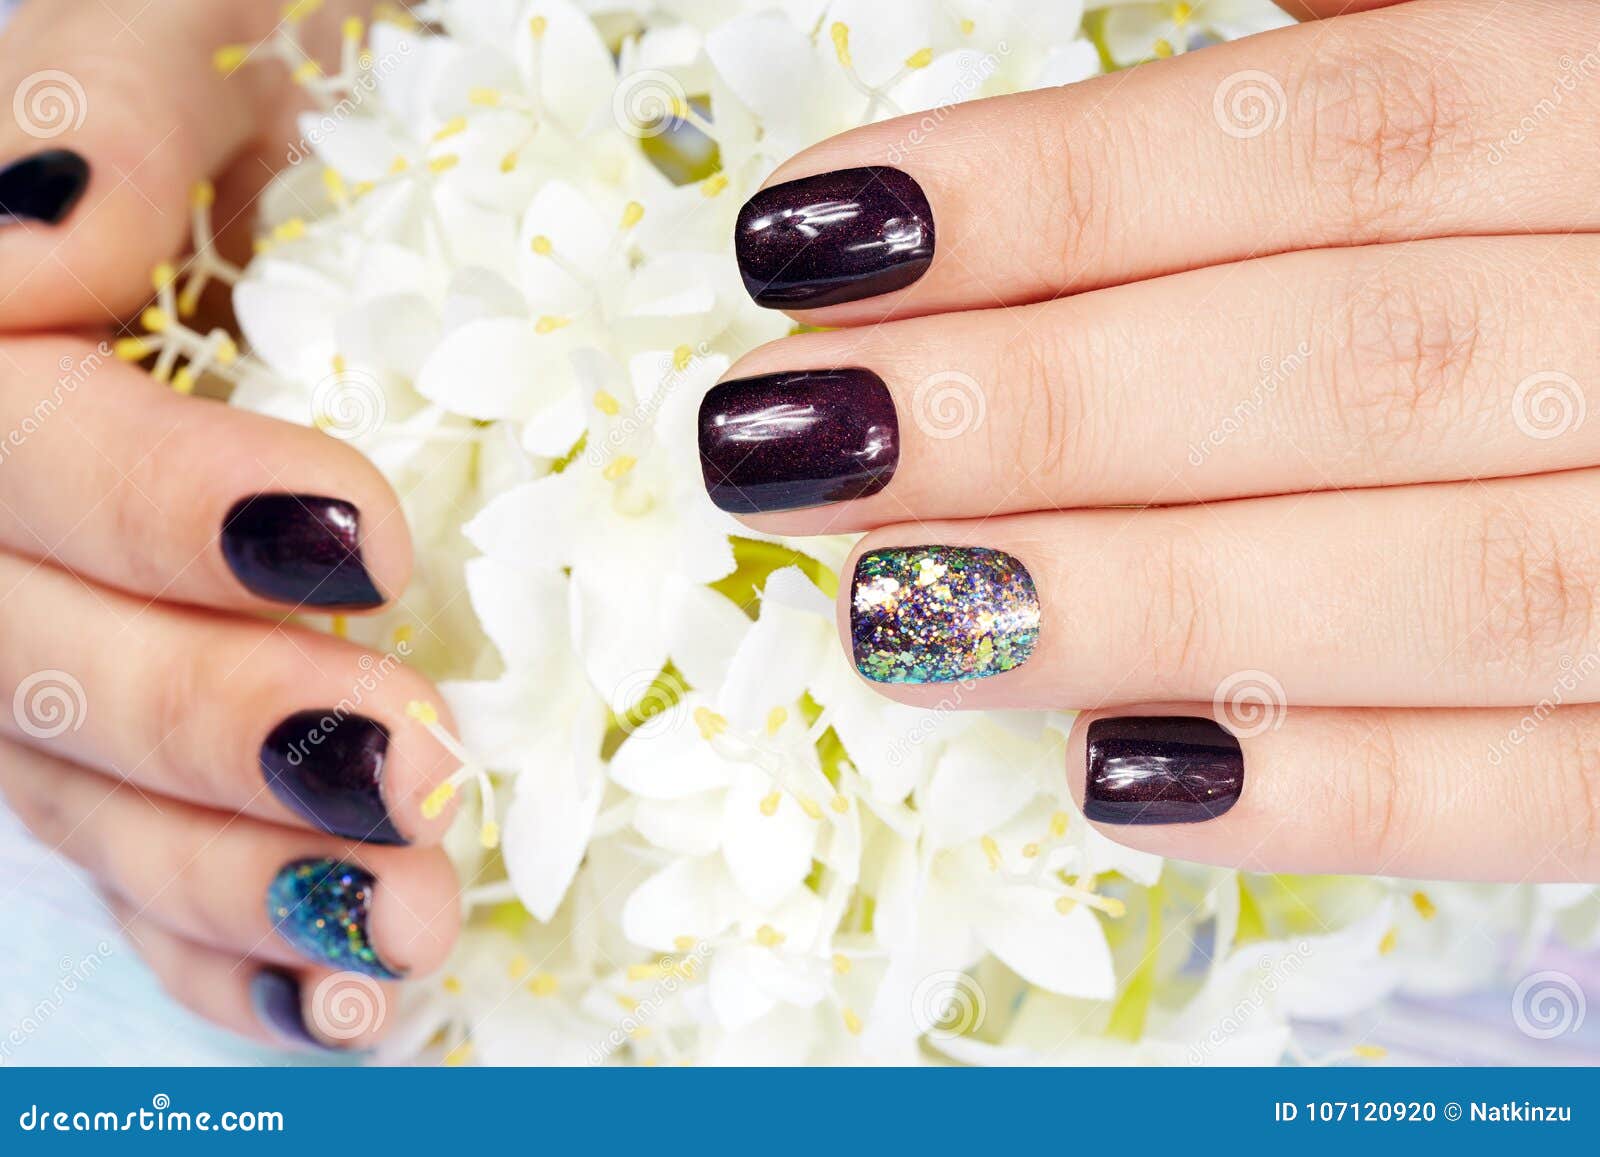 Hands With Manicured Nails Colored With Dark Purple Nail Polish Stock Photo Image Of Hands Hand 107120920 500 pcs nail polish french flat head denim false nail ballet coffin false nails tips artificial fake nails art acrylic manicure. https www dreamstime com hands manicured nails colored dark purple nail polish beautiful short white flowers image107120920